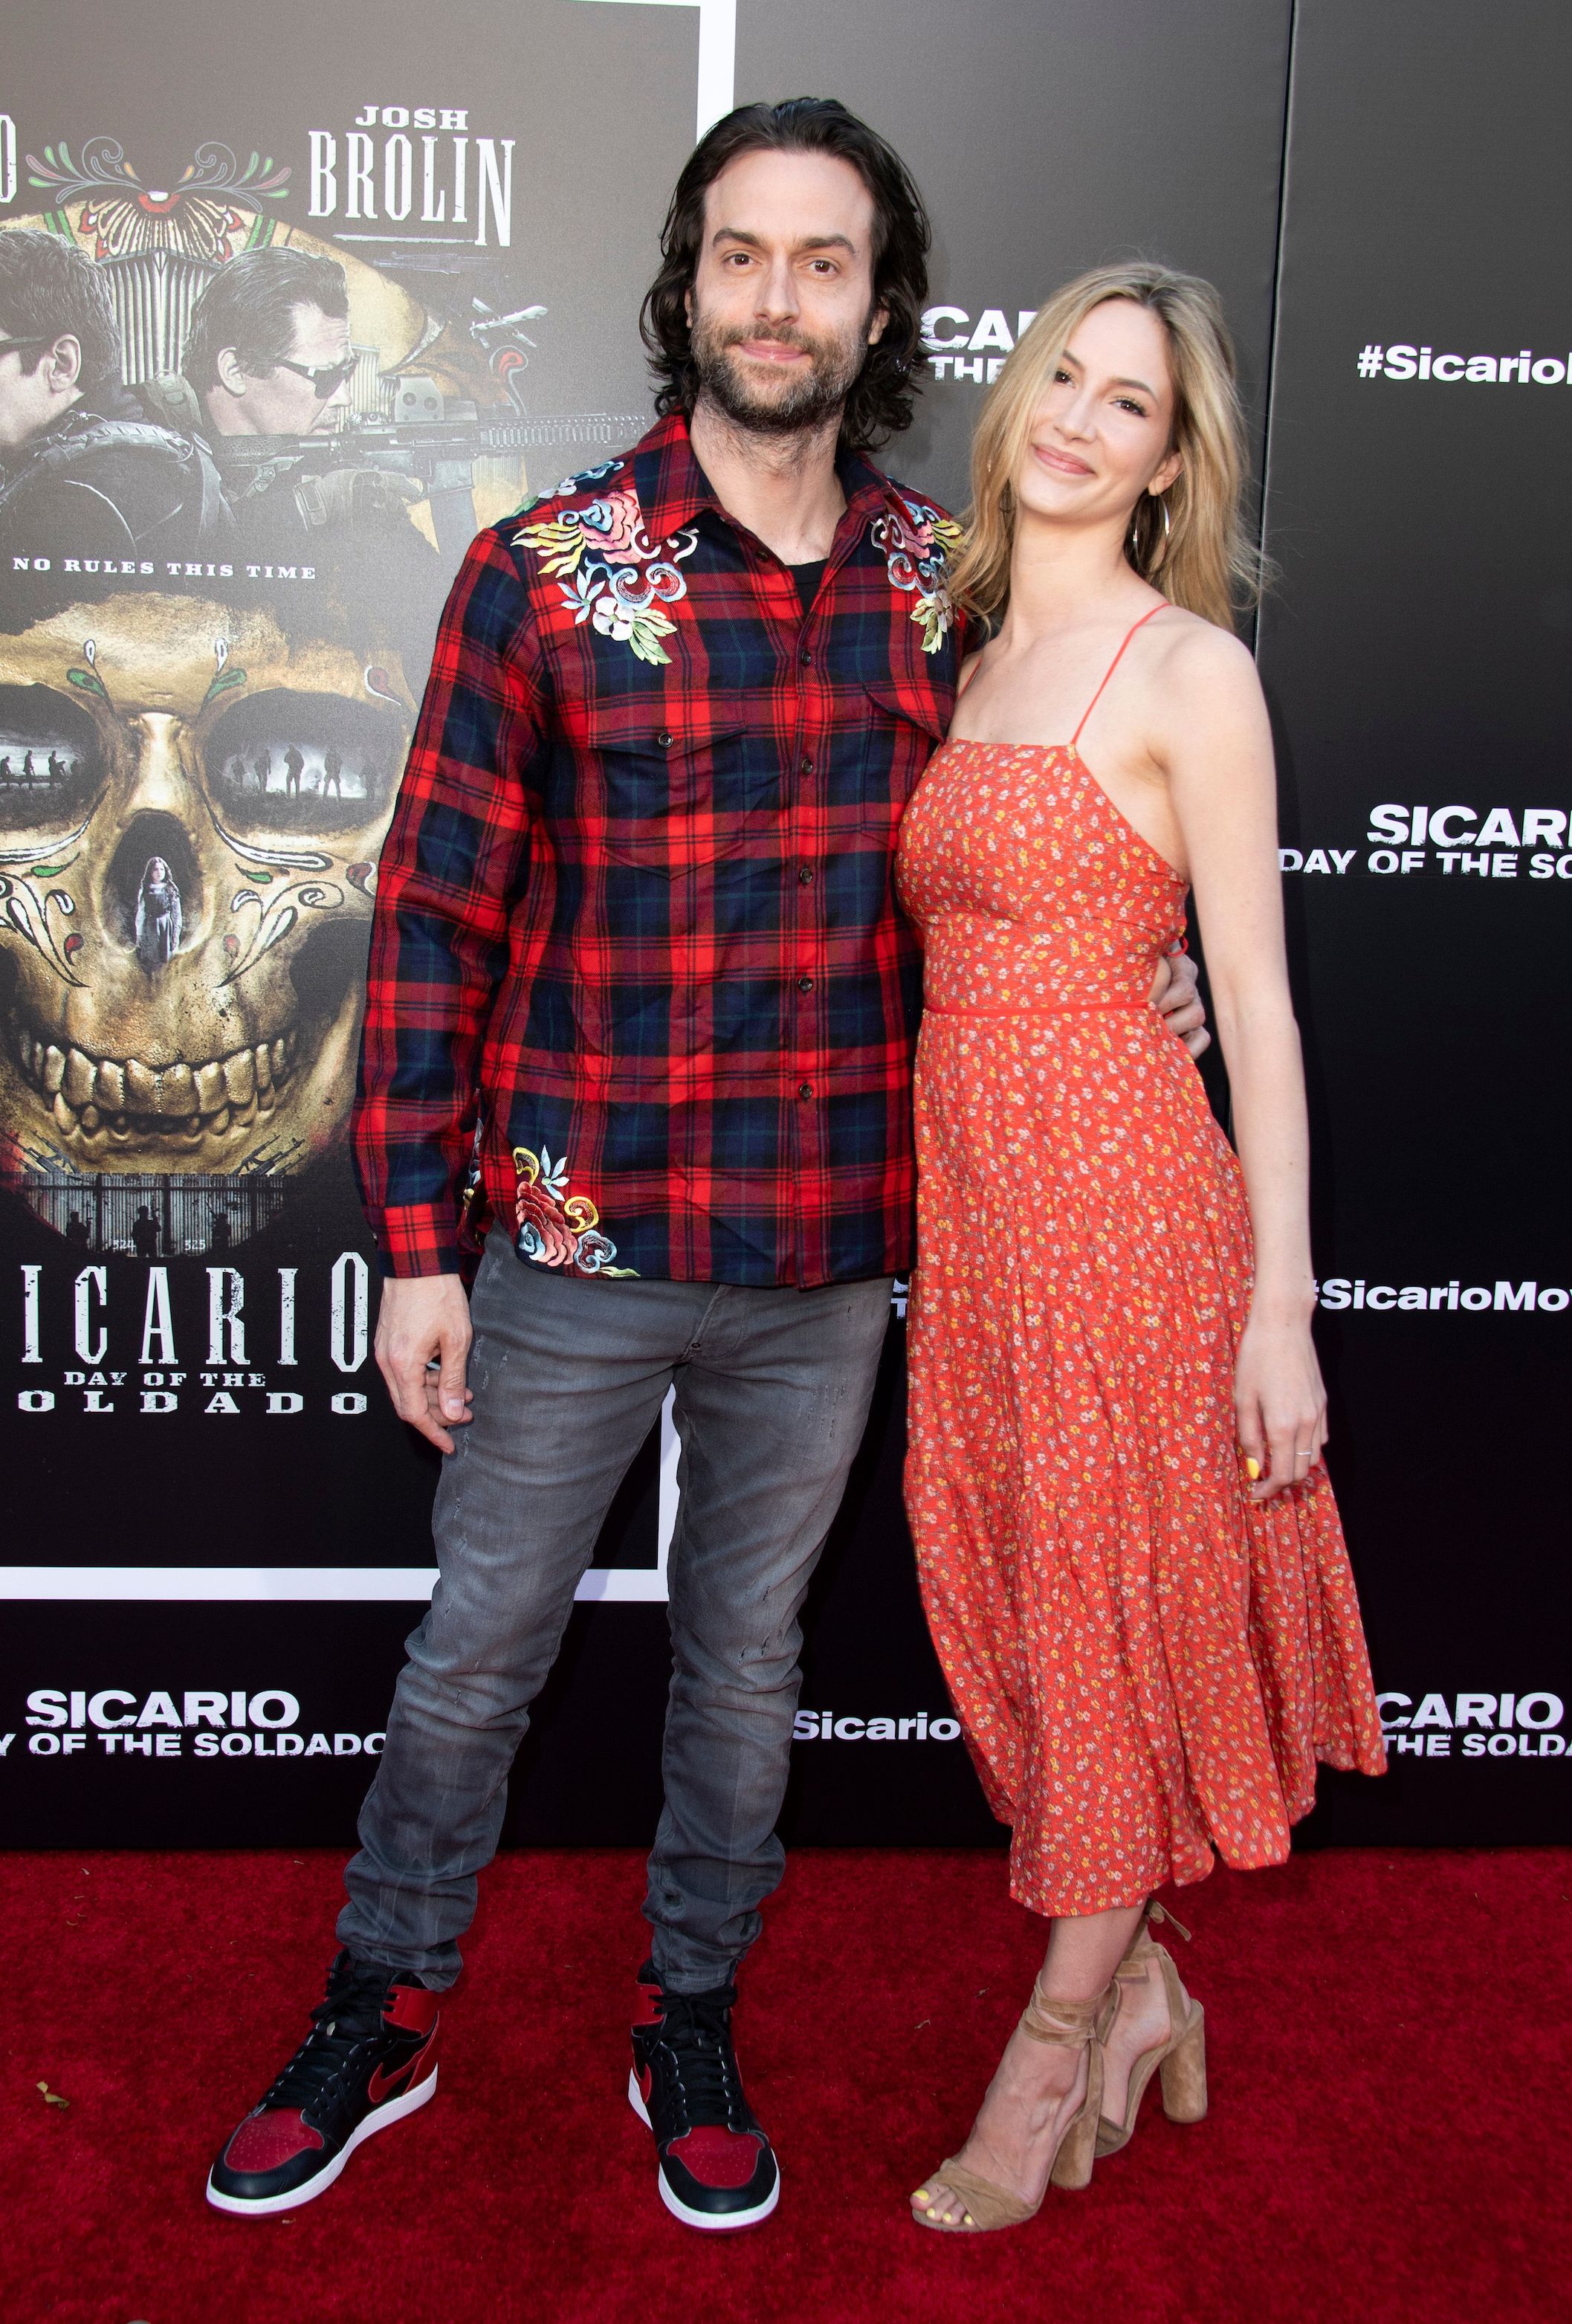 Chris D'Elia's girlfriend, Kristin Taylor, standing and smiling with Chris D'Elia